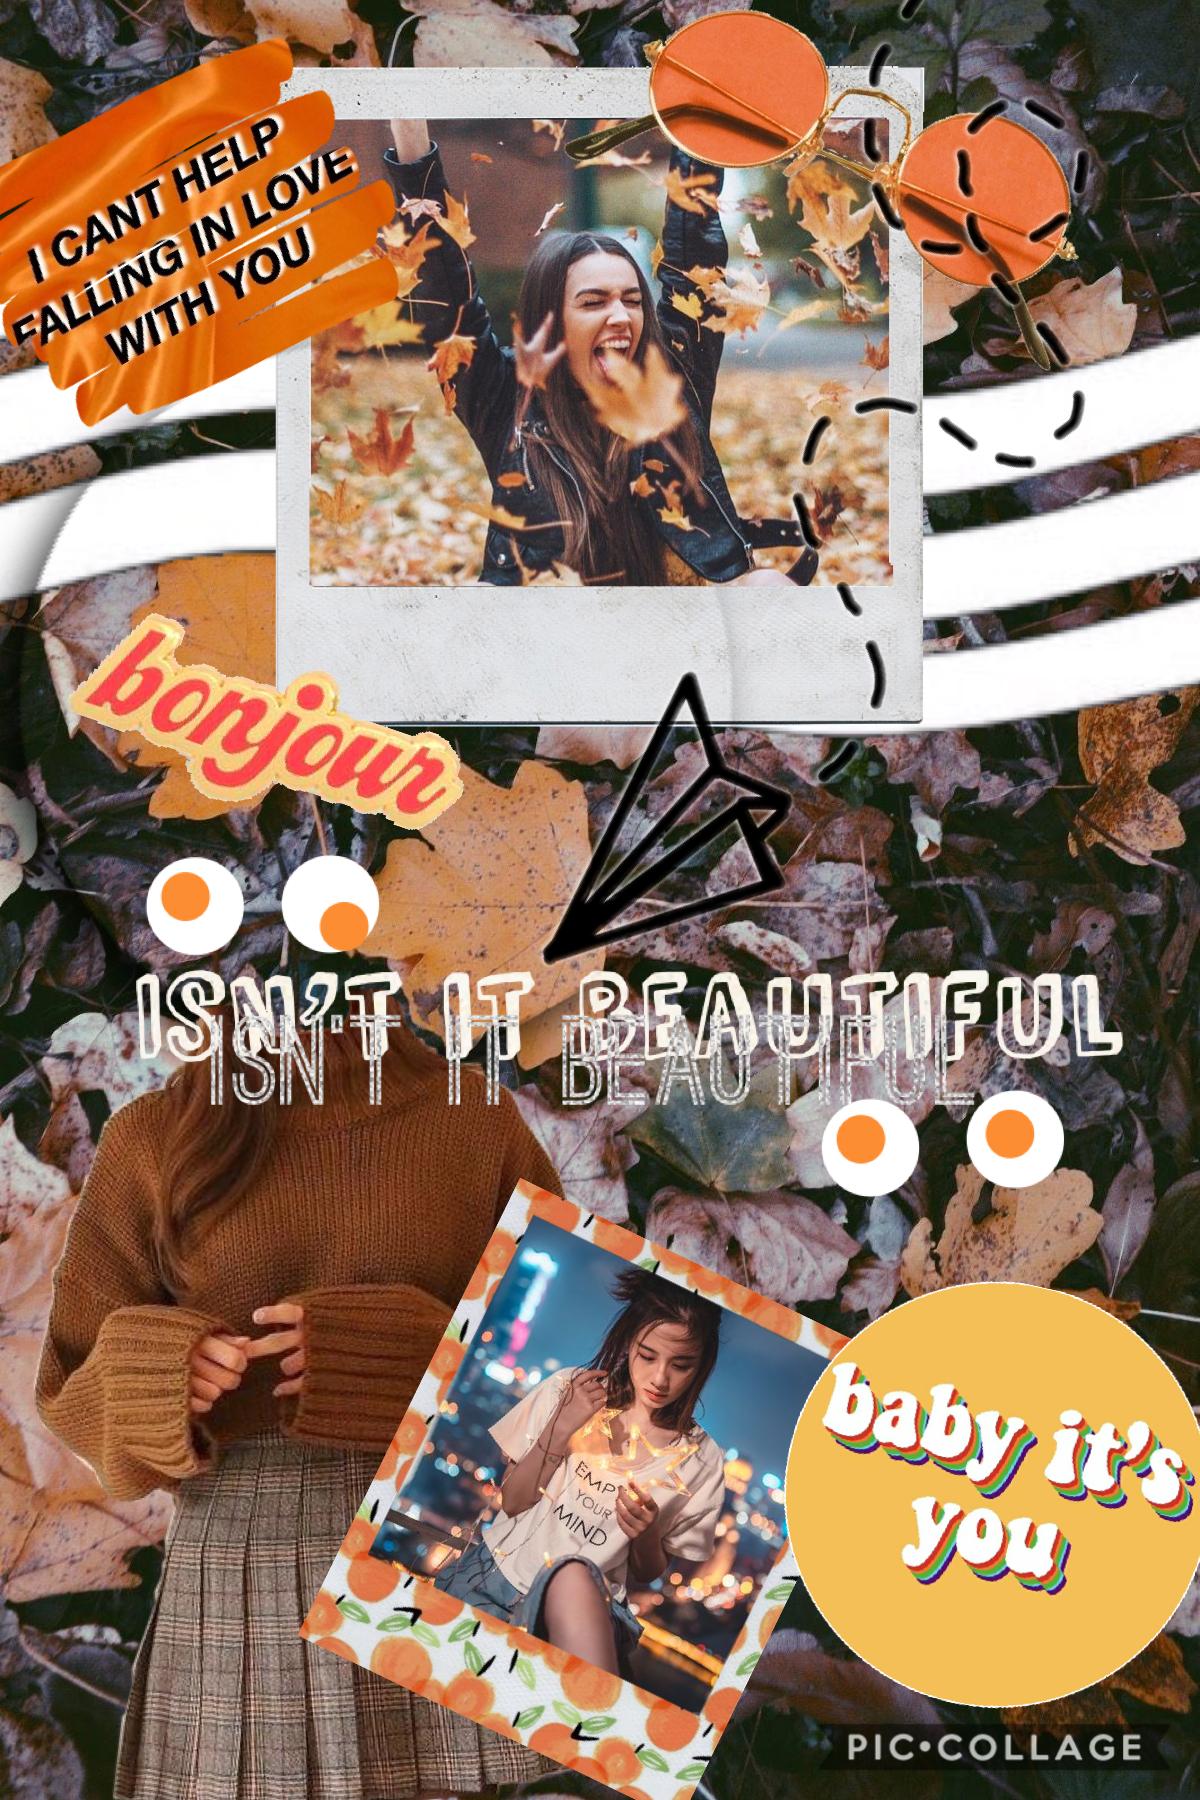 🥀🍂tap🥀🍂


Ok I really like this!!💛🧡 btw I have the lines is that way y’all know it’s mine and not anyone else’s! Bc there have been people copying my work💔 so I hope y’all like this as much as I do!❤️❤️